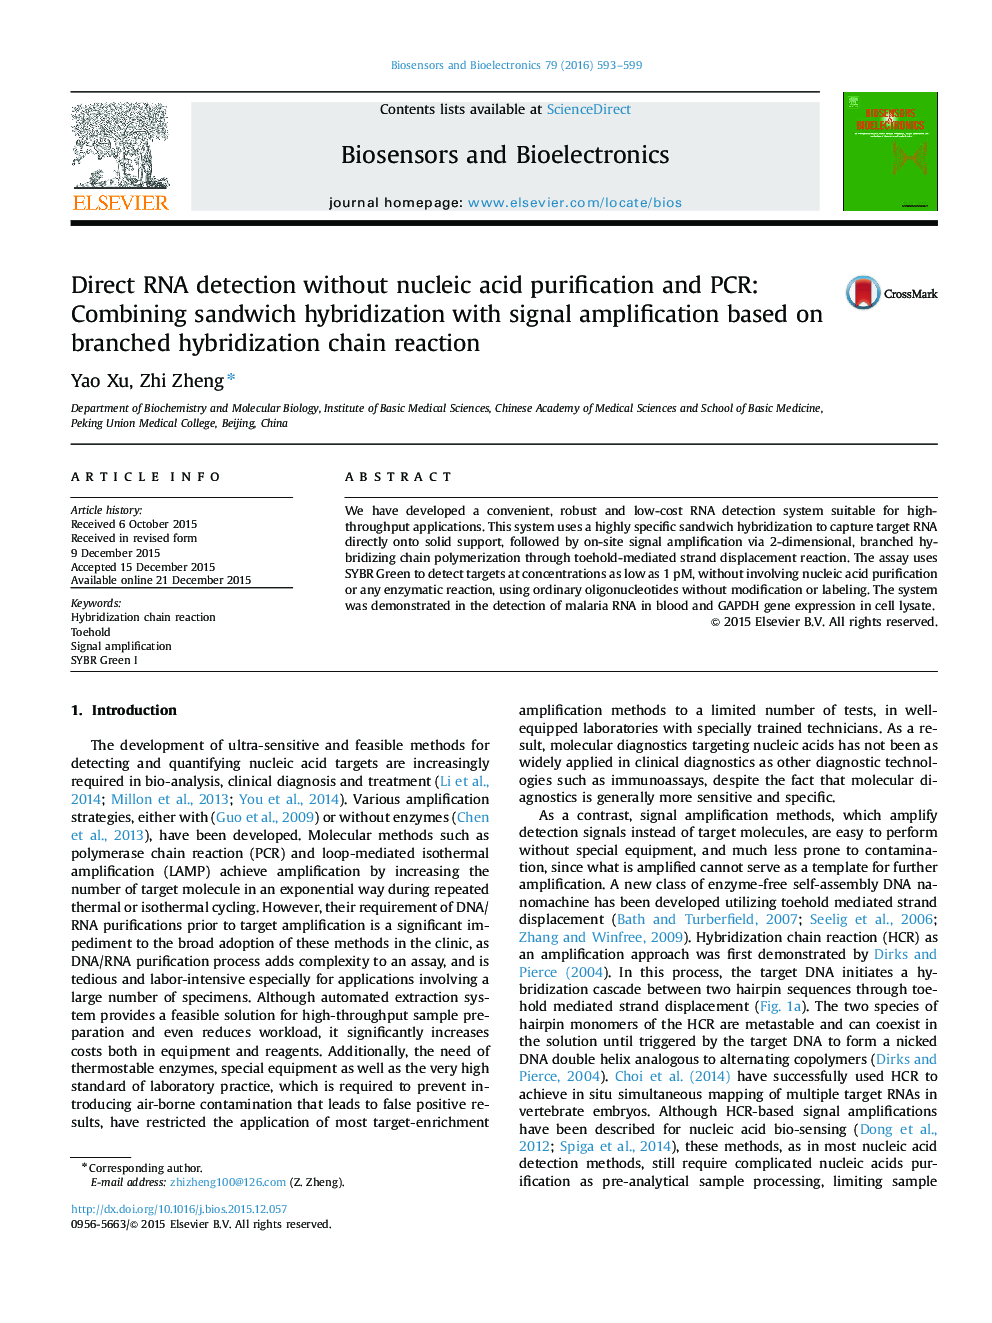 Direct RNA detection without nucleic acid purification and PCR: Combining sandwich hybridization with signal amplification based on branched hybridization chain reaction